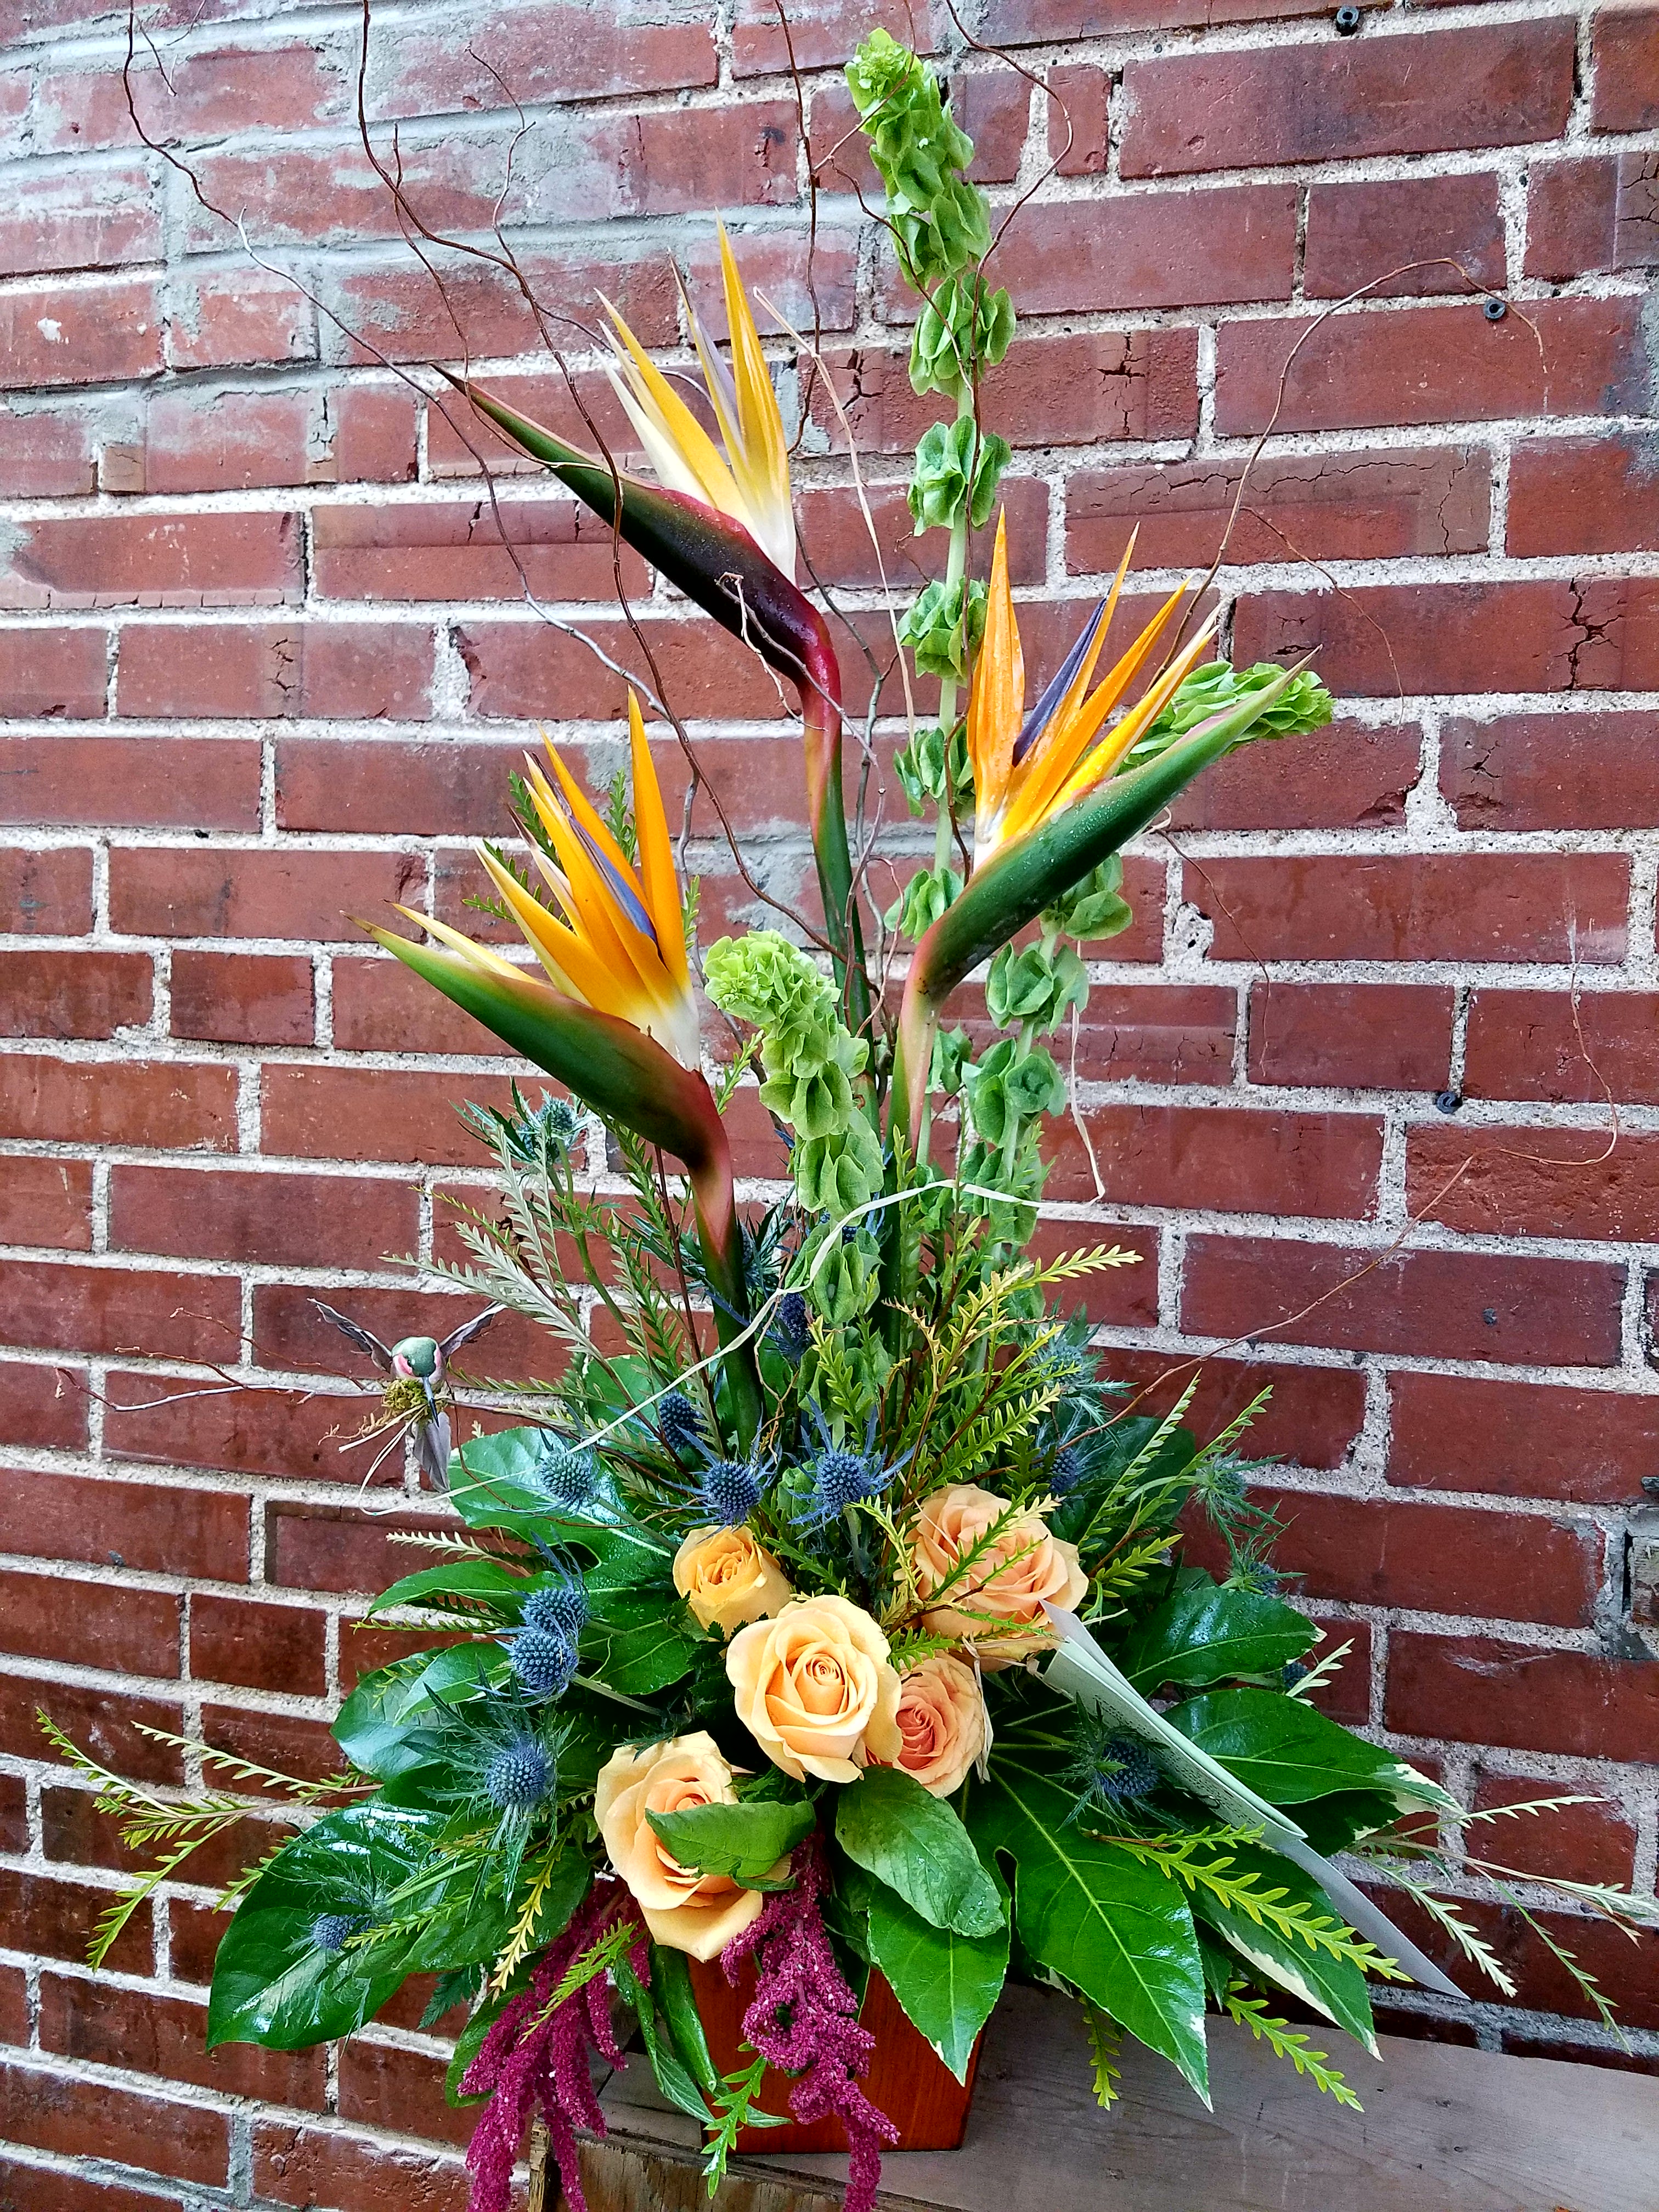 Eckert Florist's Heavenly Tropical Bouquet *24 Hour Notice Required - This tropical arrangement feature birds of paradise, roses, additional tropical foliages and flowers. Please Note: 24 Hour notice required for this arrangement. *Some flowers and colors may vary